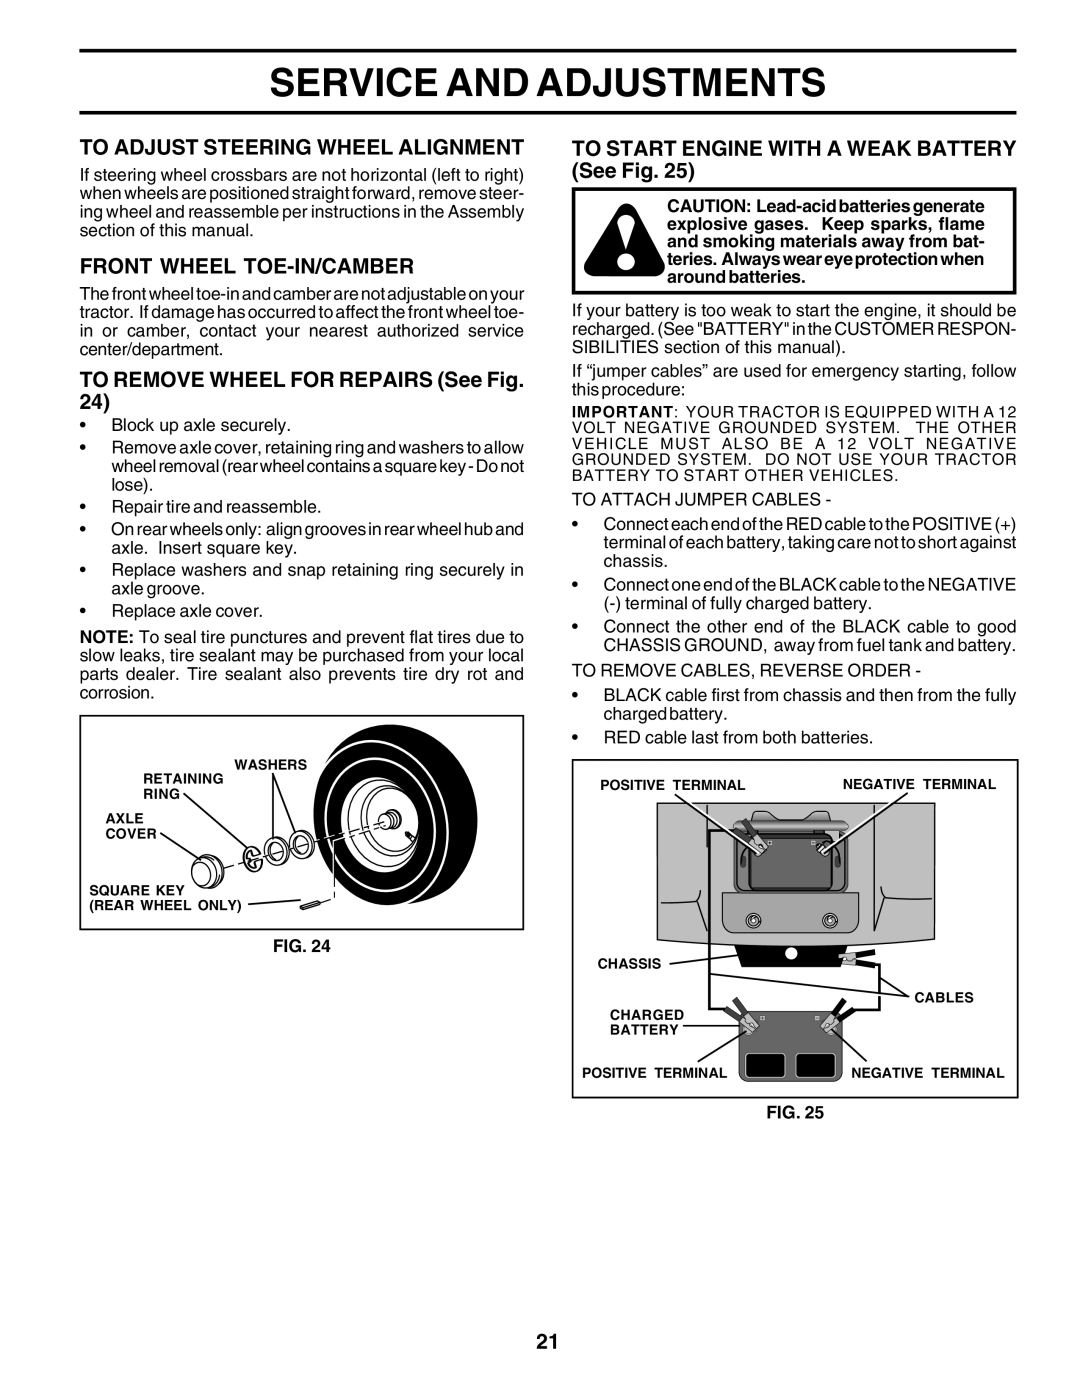 Poulan PR17542STA To Adjust Steering Wheel Alignment, Front Wheel Toe-In/Camber, TO REMOVE WHEEL FOR REPAIRS See Fig 